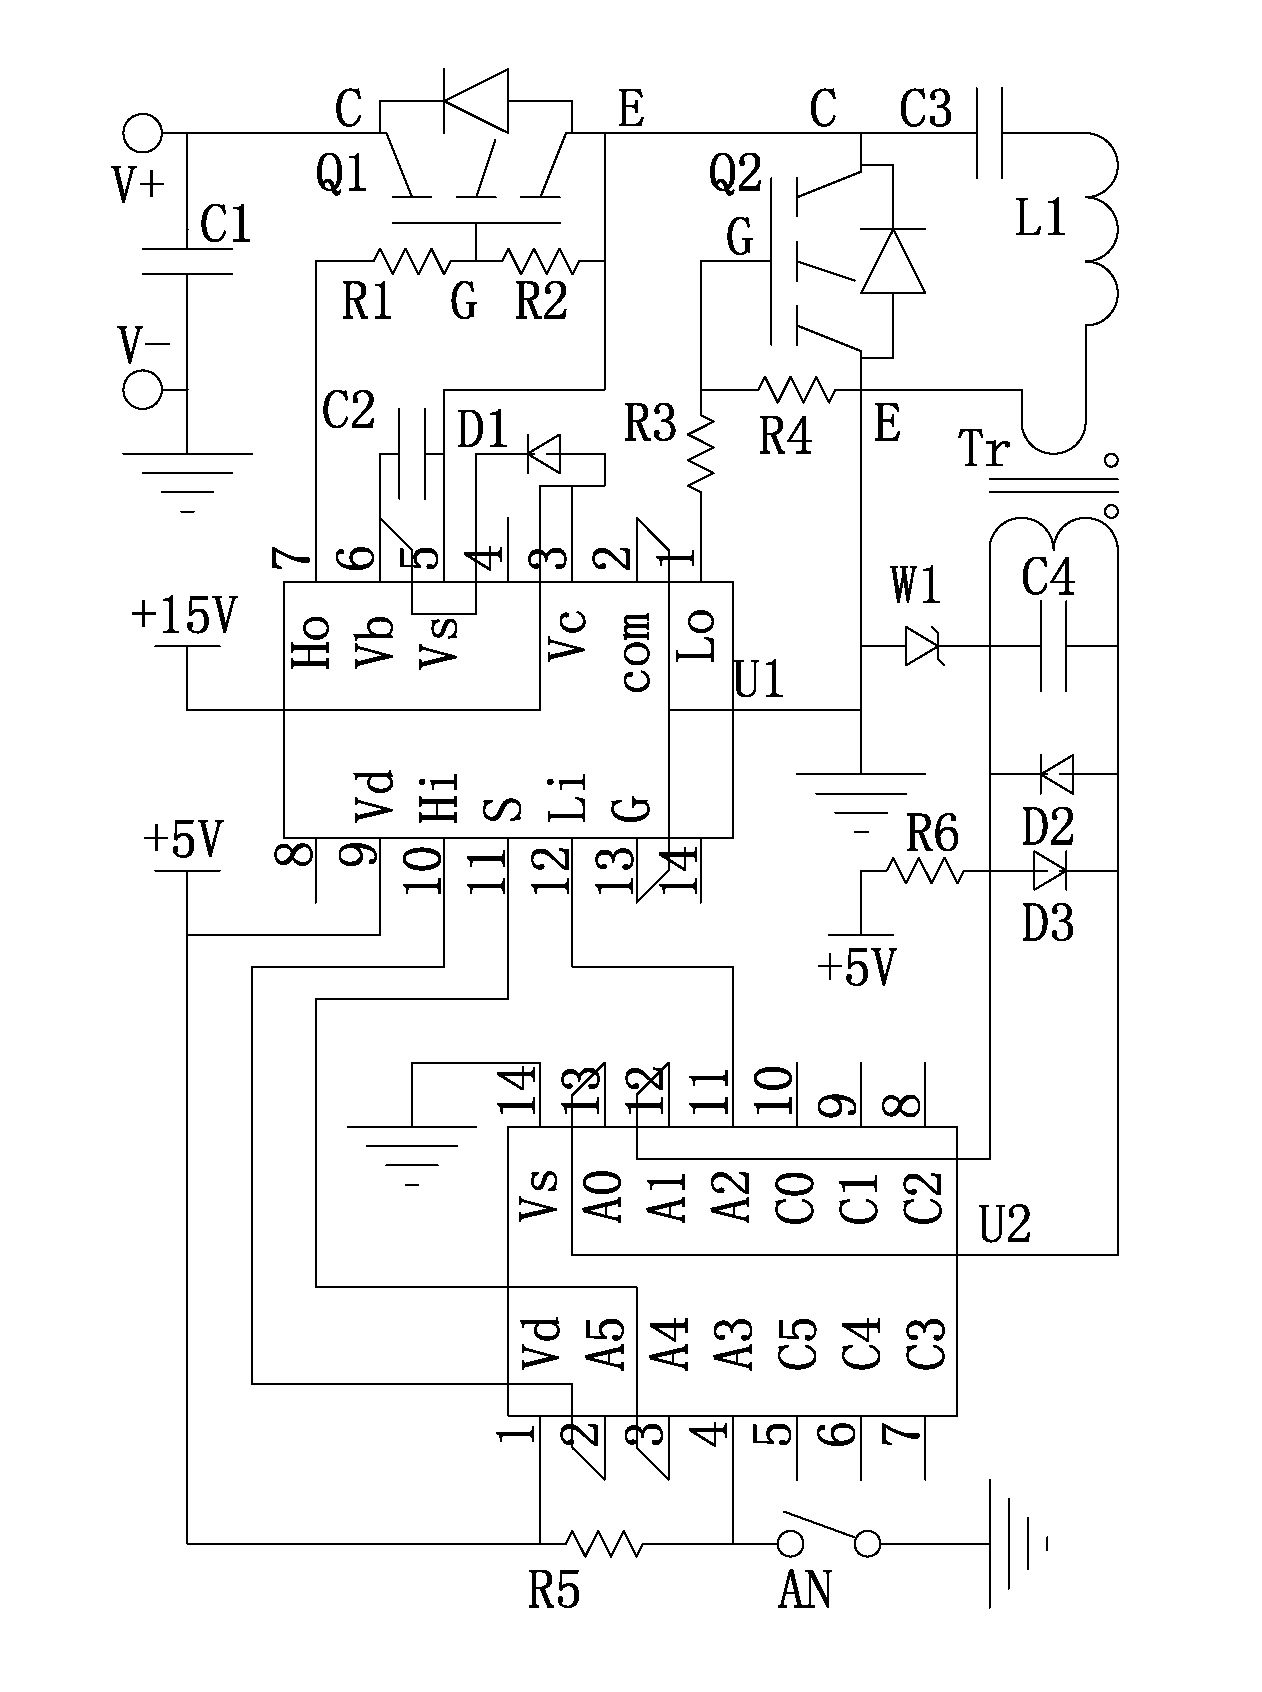 Electromagnetic heating circuit utilizing single-chip microcomputer to automatically track resonant frequency